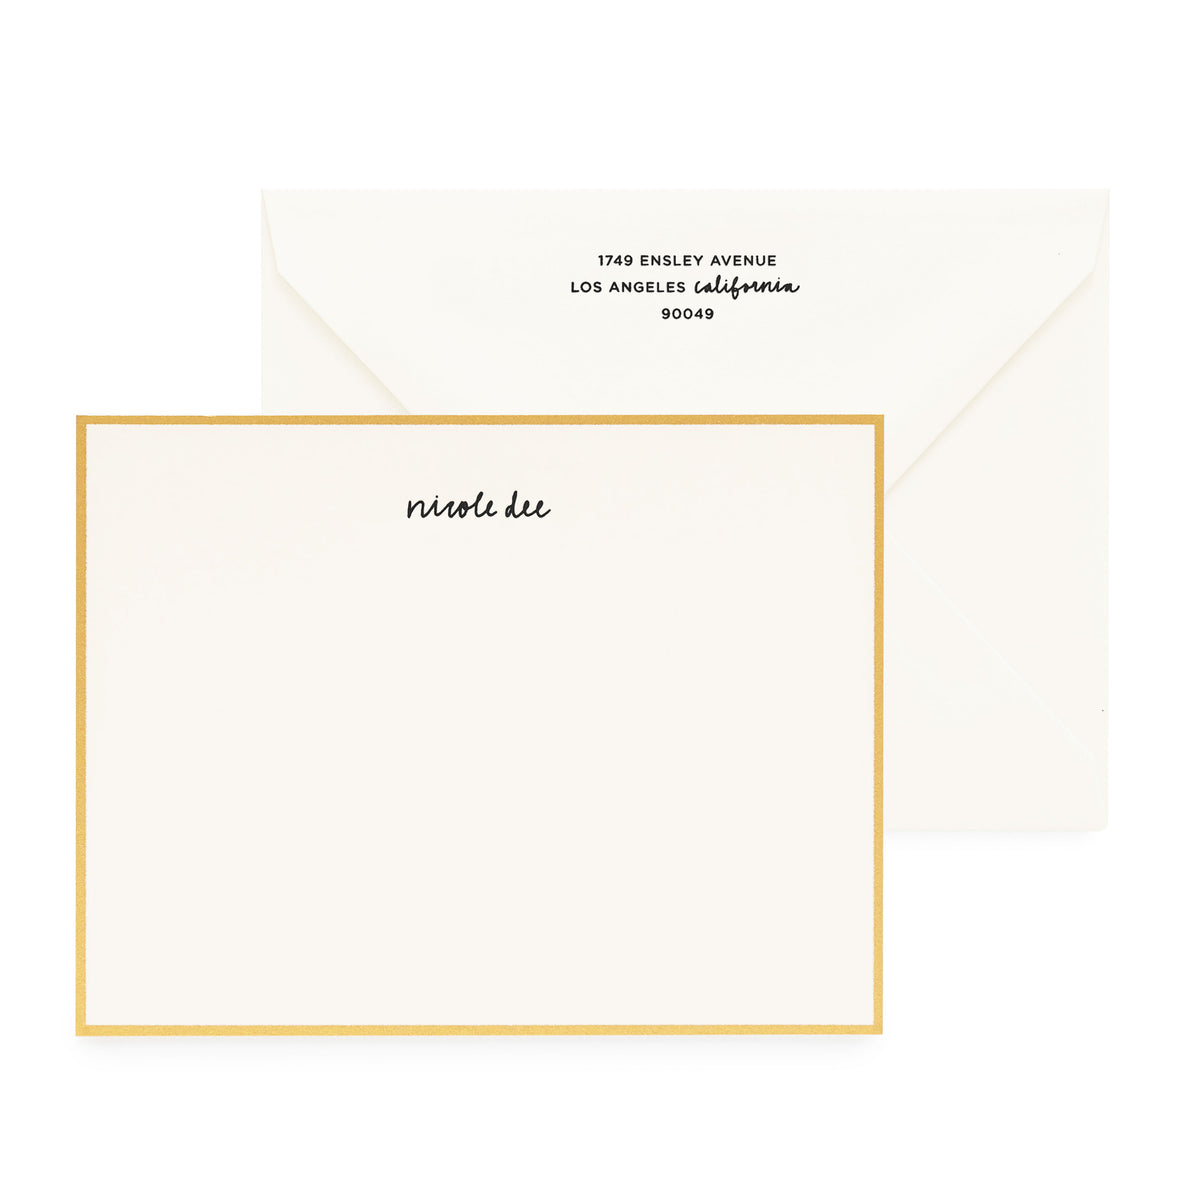 cream card with gold border and black text, cream envelope with black text